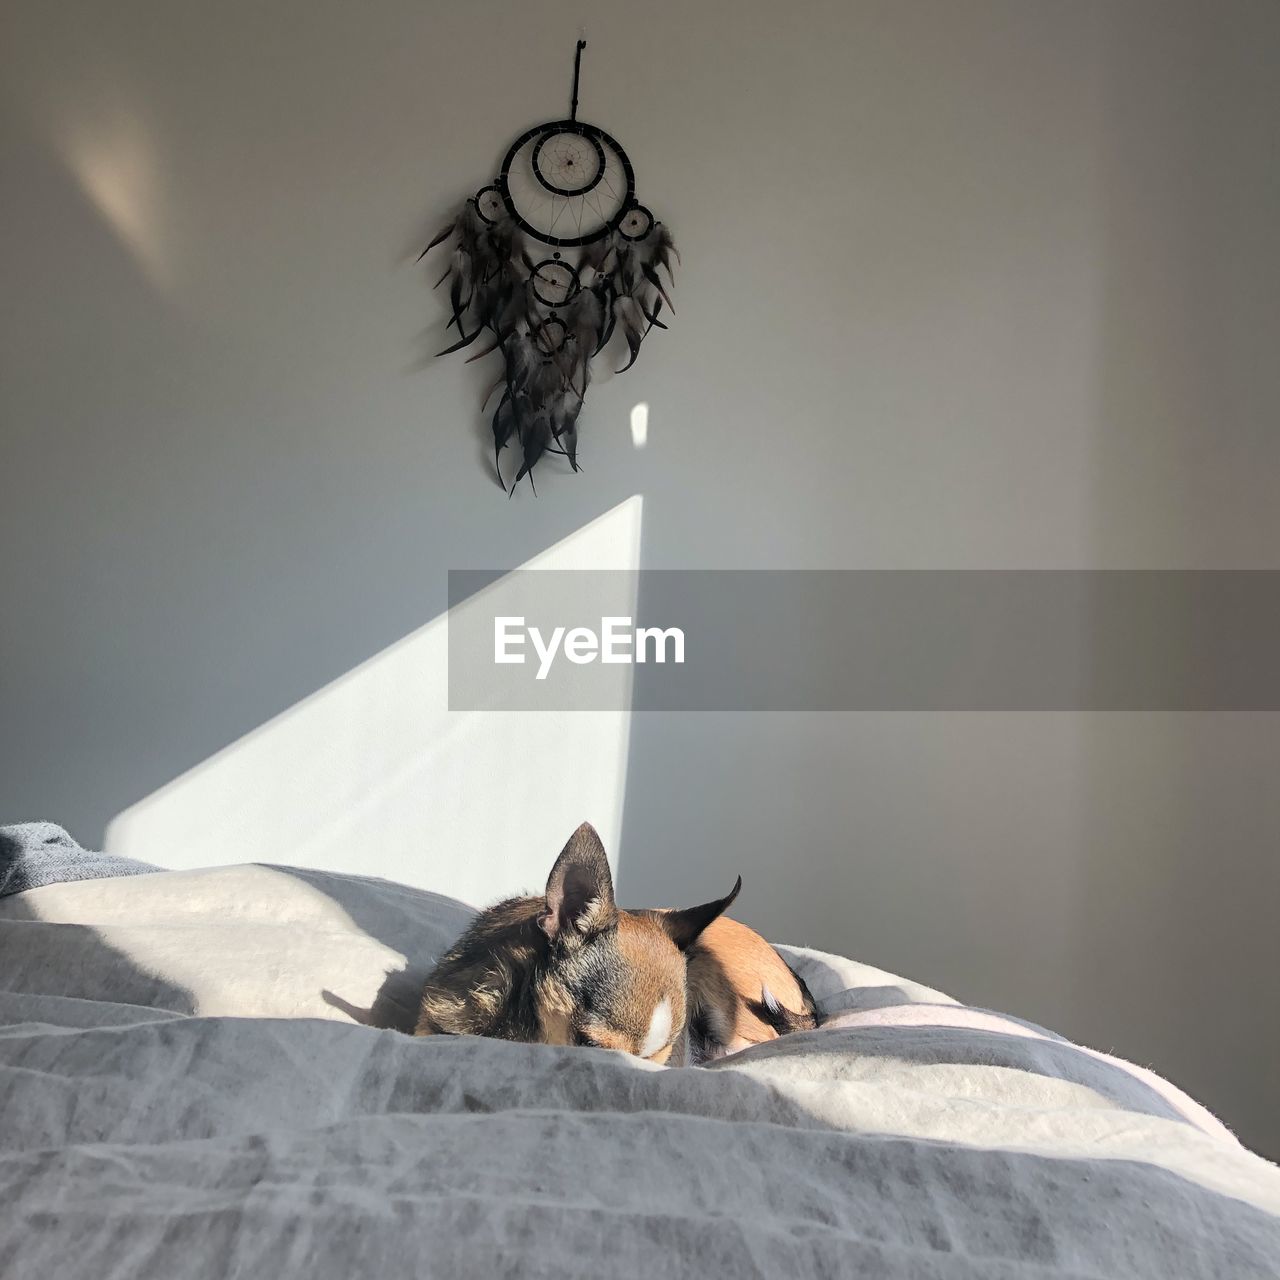 Dog sleeping on bed against dreamcatcher hanging on wall